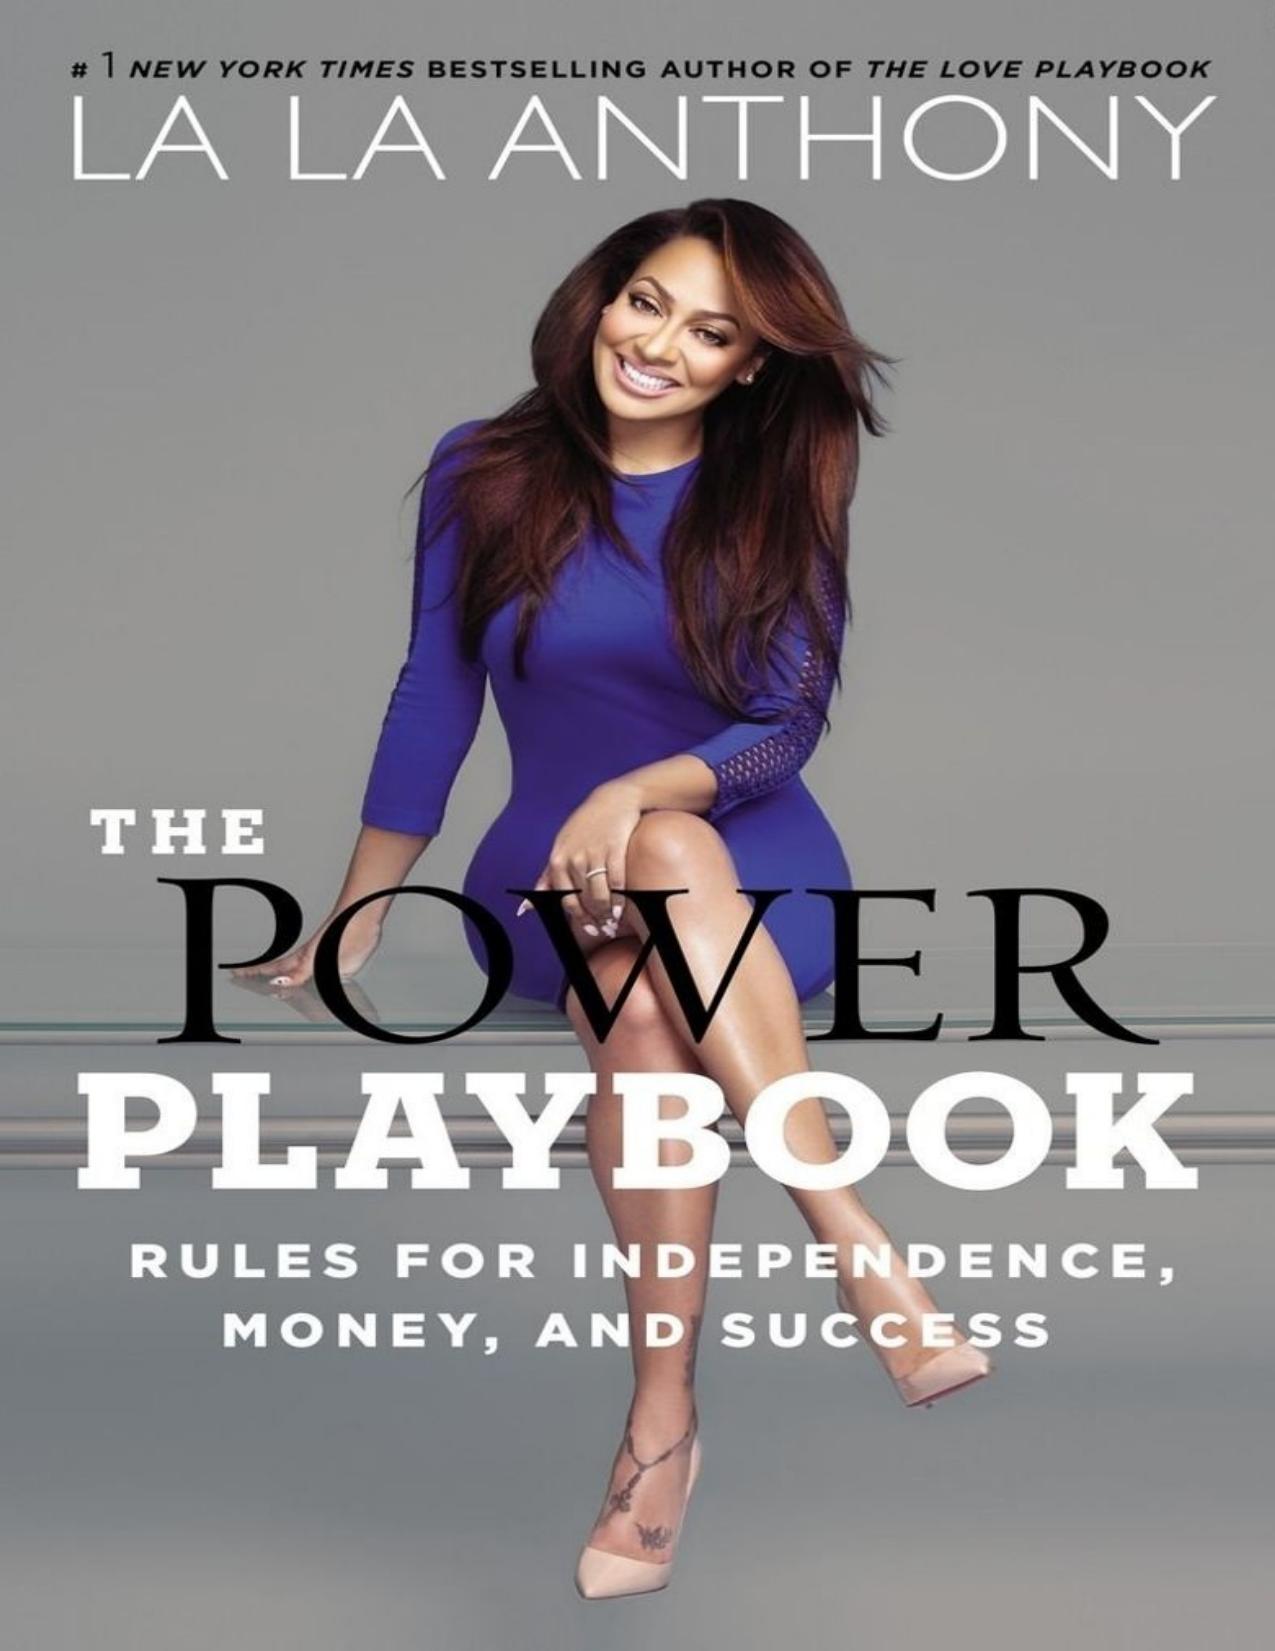 The Power Playbook: Rules for Independence, Money and Success - PDFDrive.com